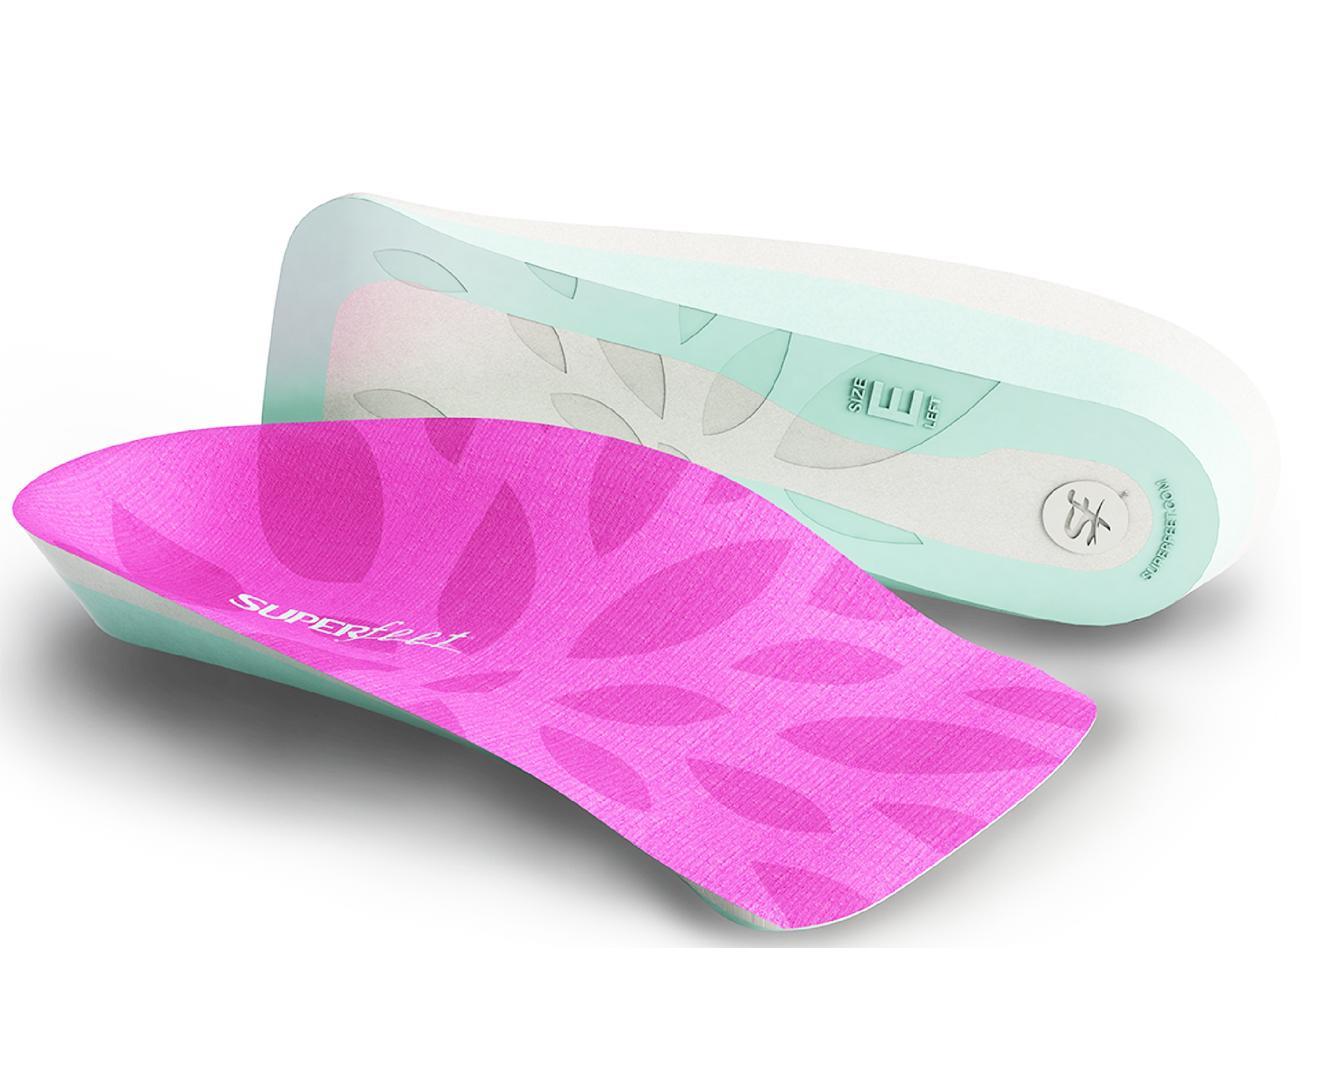 Womens Superfeet Me 3/4 Length Insoles Inserts Orthotics Arch Support Cushion - Blush - B (4.5-6)